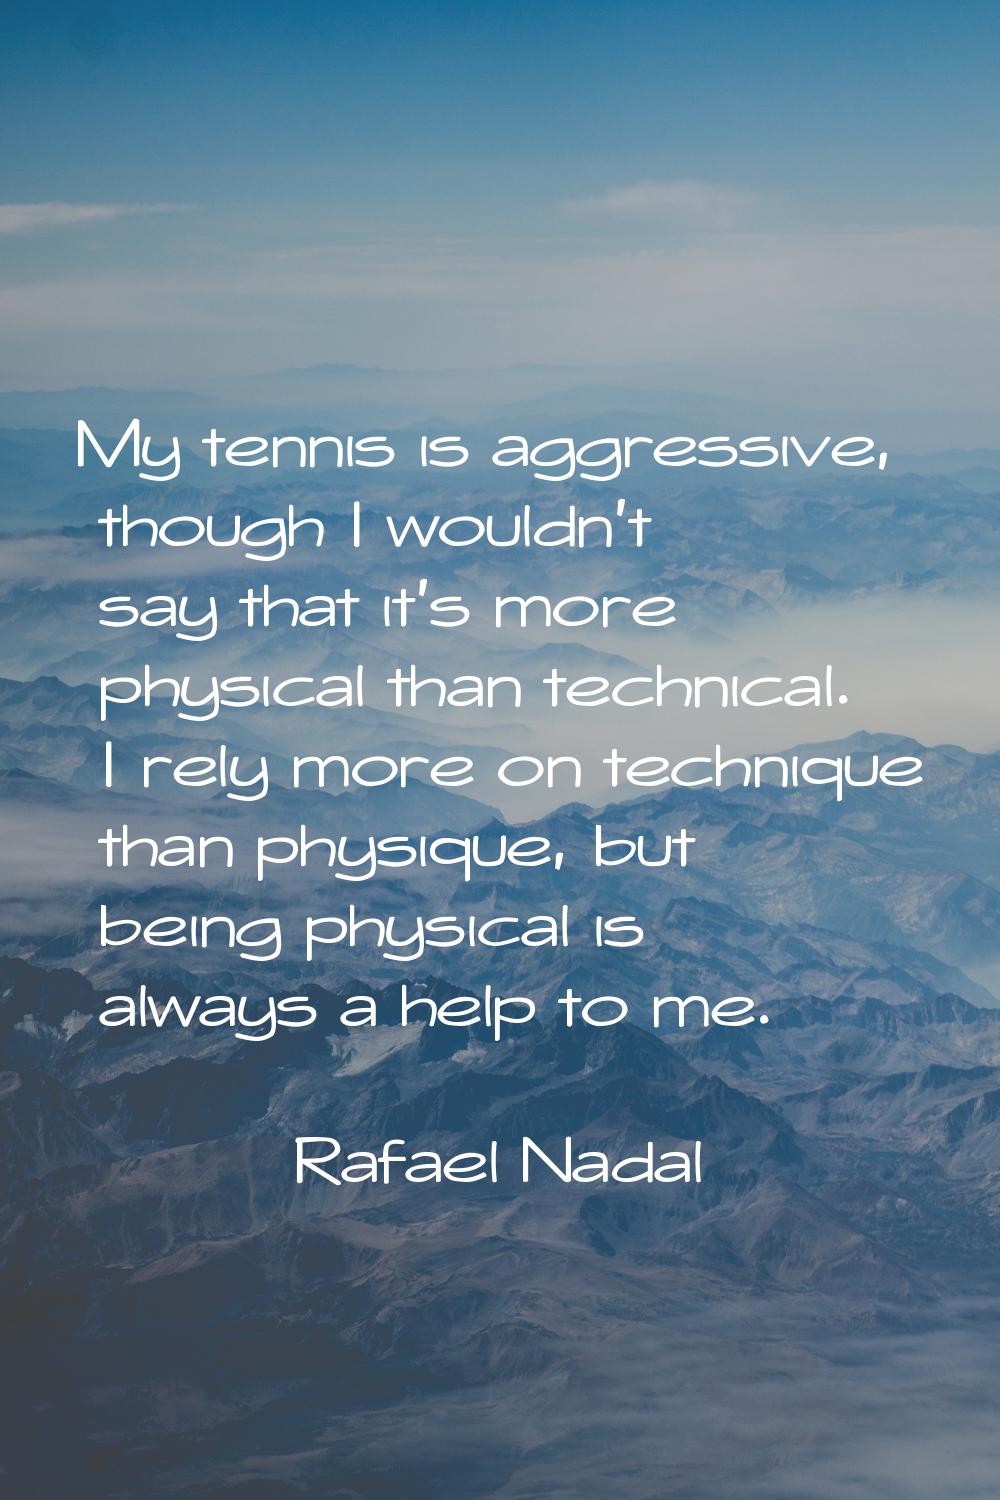 My tennis is aggressive, though I wouldn't say that it's more physical than technical. I rely more 